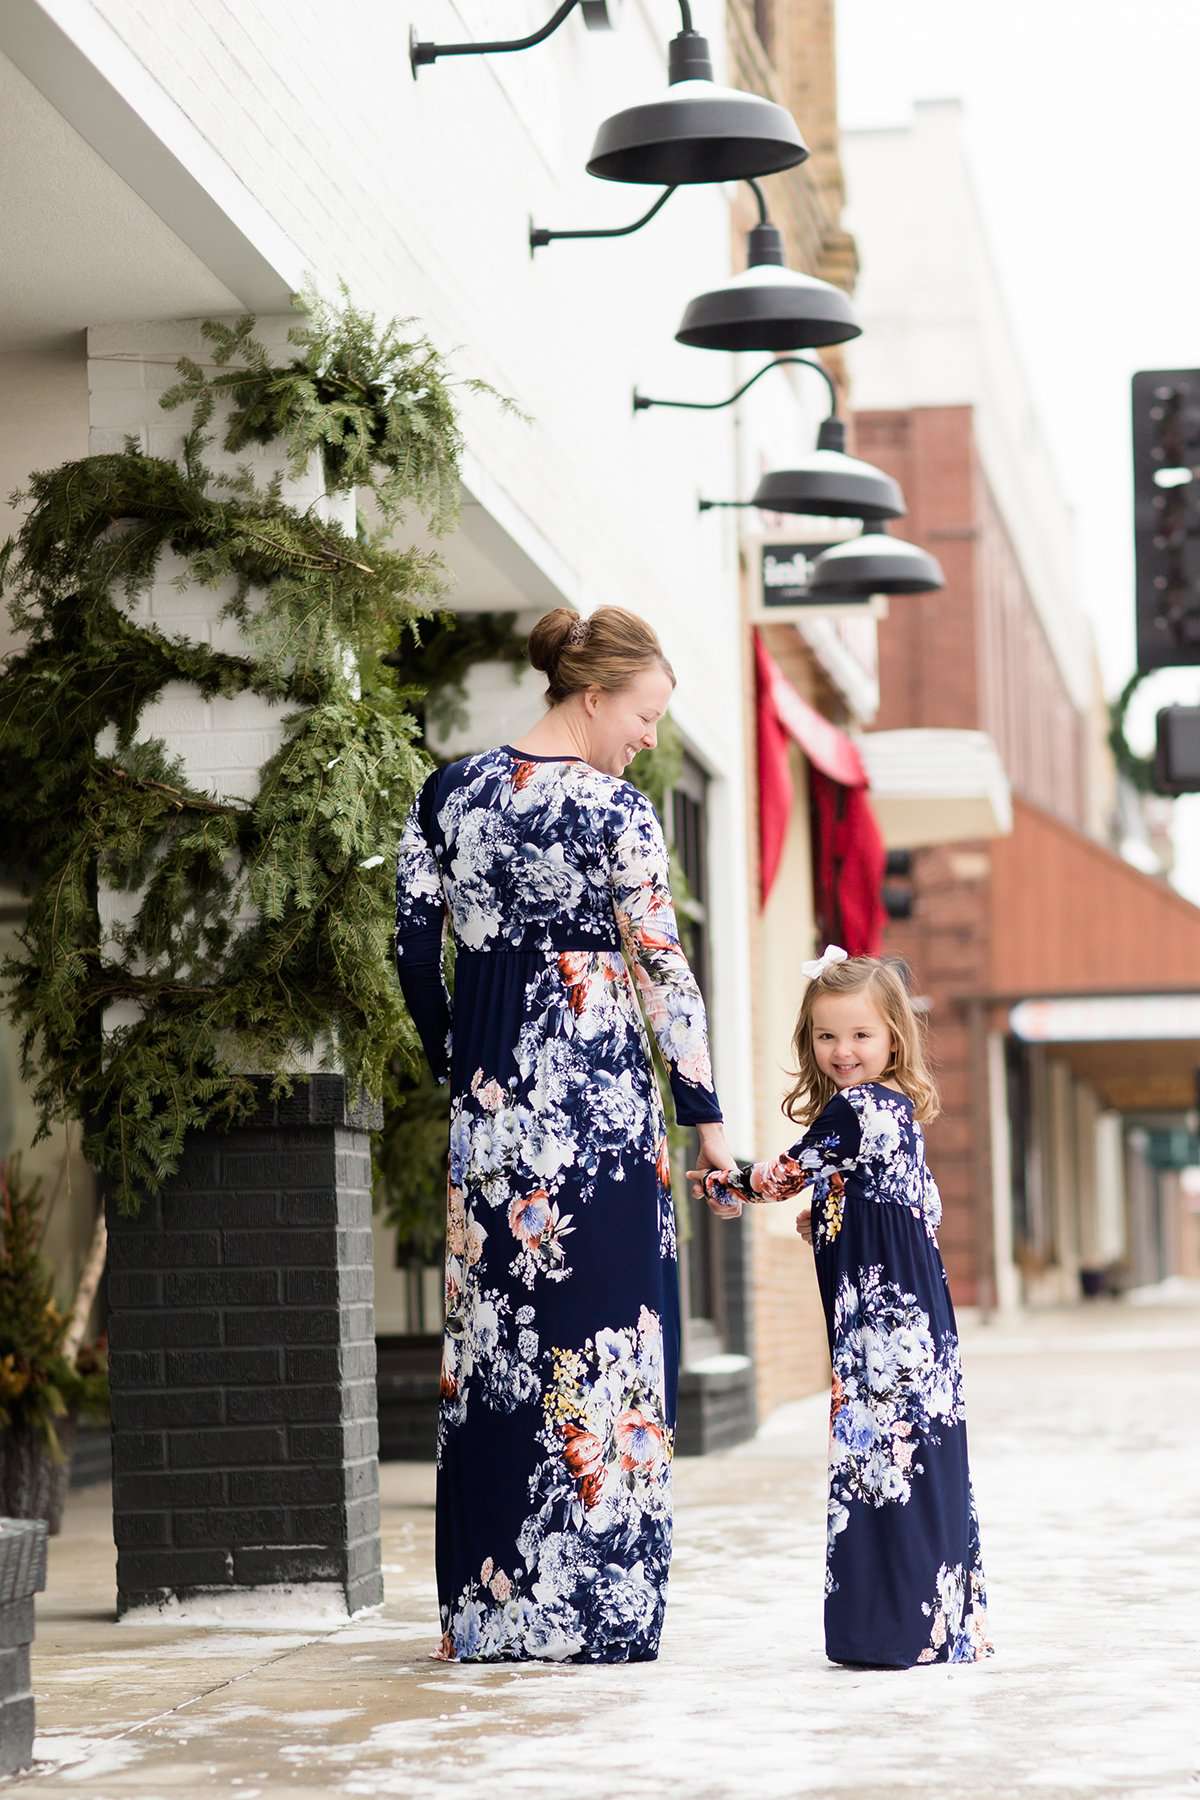 Mommy and me style floral maxi dress in plum or navy